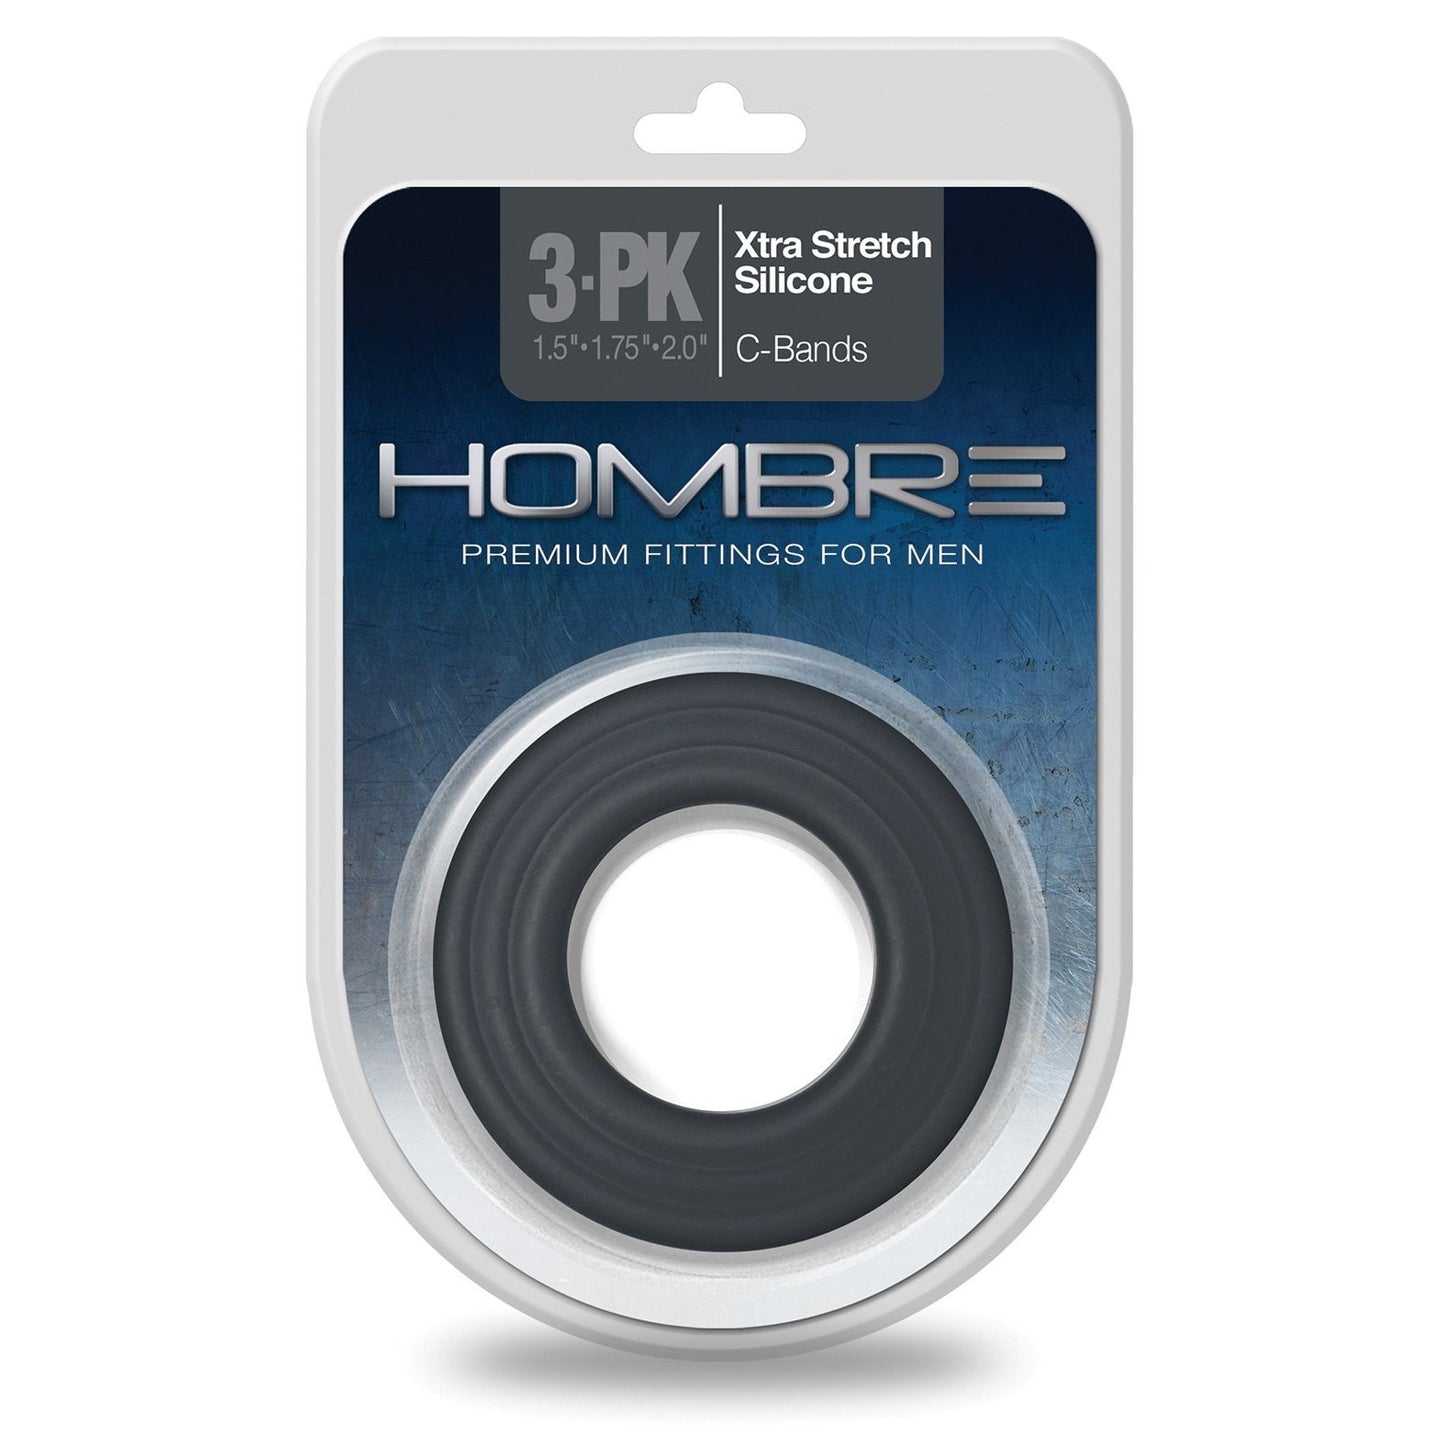 Hombre Xtra Stretch Silicone C Bands